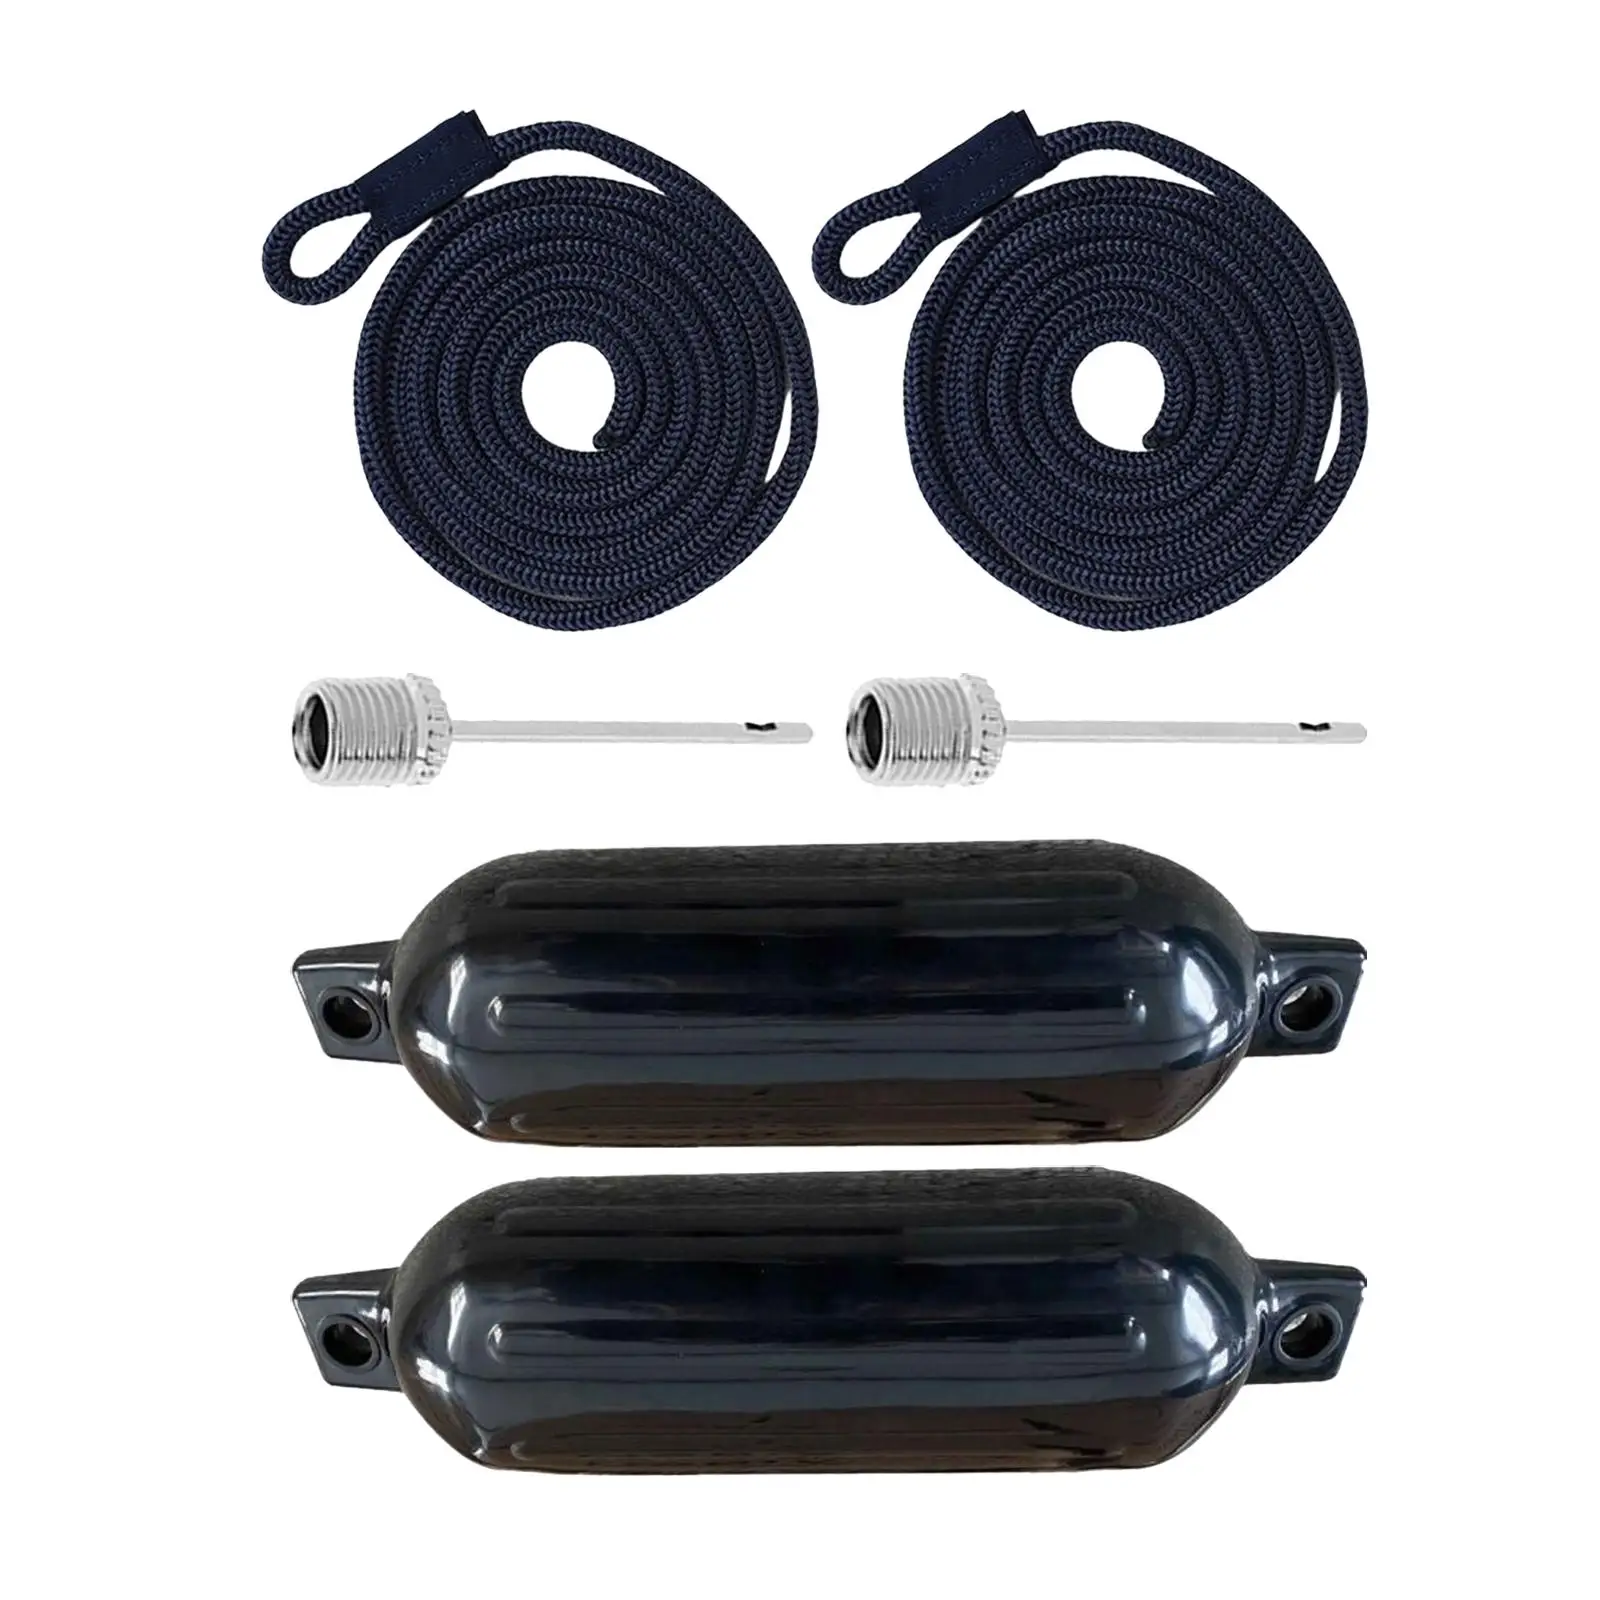 Marine Boat Fenders with 2 Ropes Needles Anti Collision Protector for Docking Sailboats Fishing Boats Speedboat Pontoon